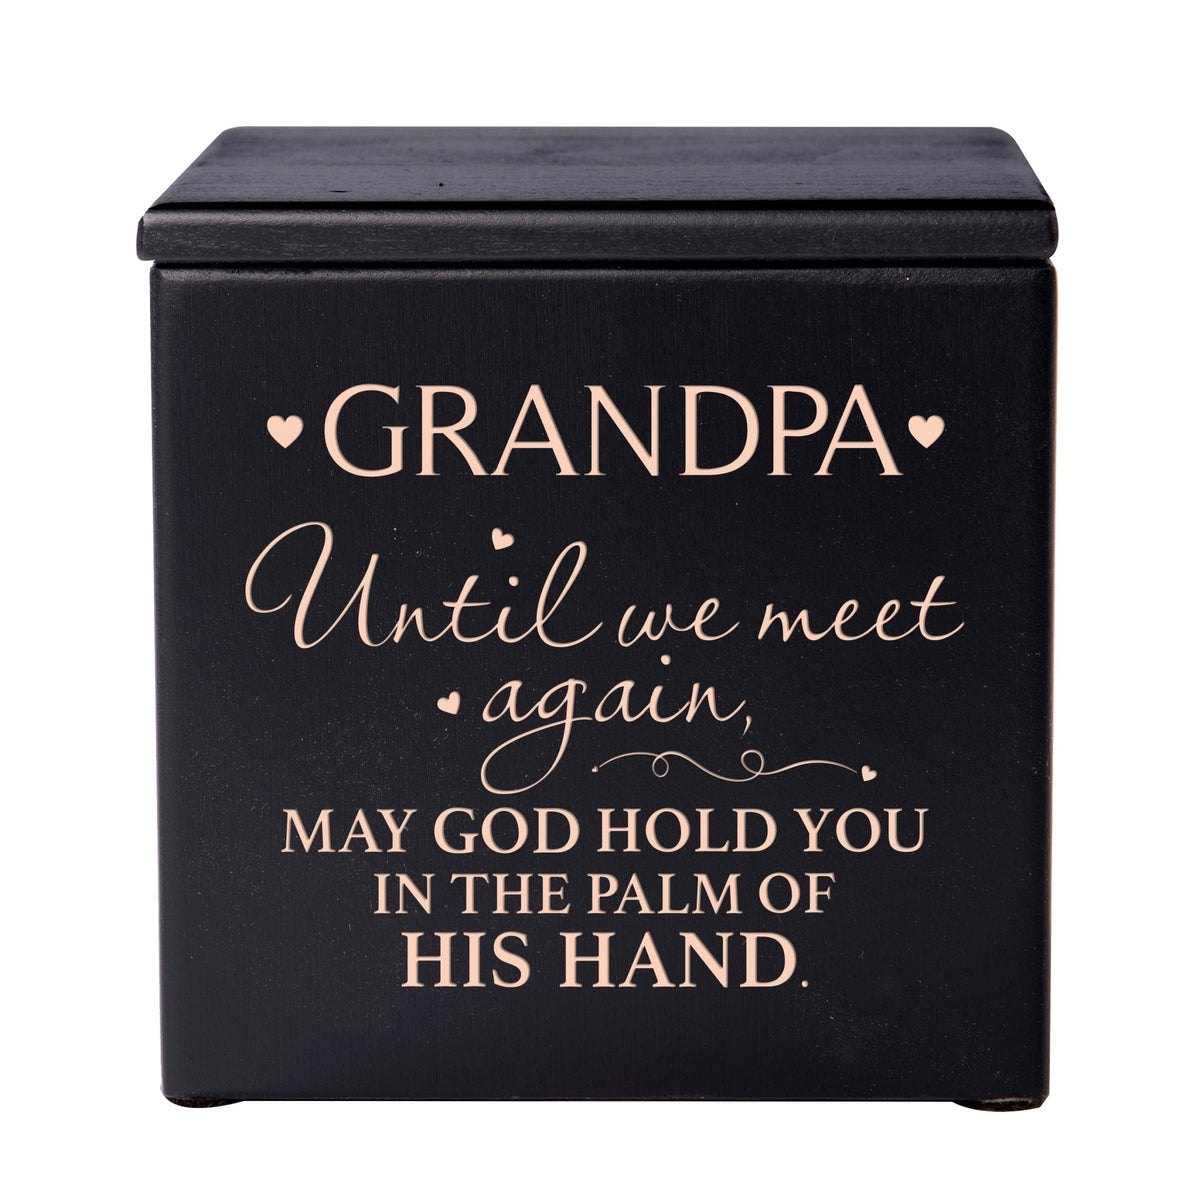 Modern Inspirational Memorial Wooden Cremation Urn Box 4.5x4.5in Holds 49 Cu Inches Of Human Ashes (Until We Meet Again Grandpa) Funeral and Commemorative Keepsake - LifeSong Milestones